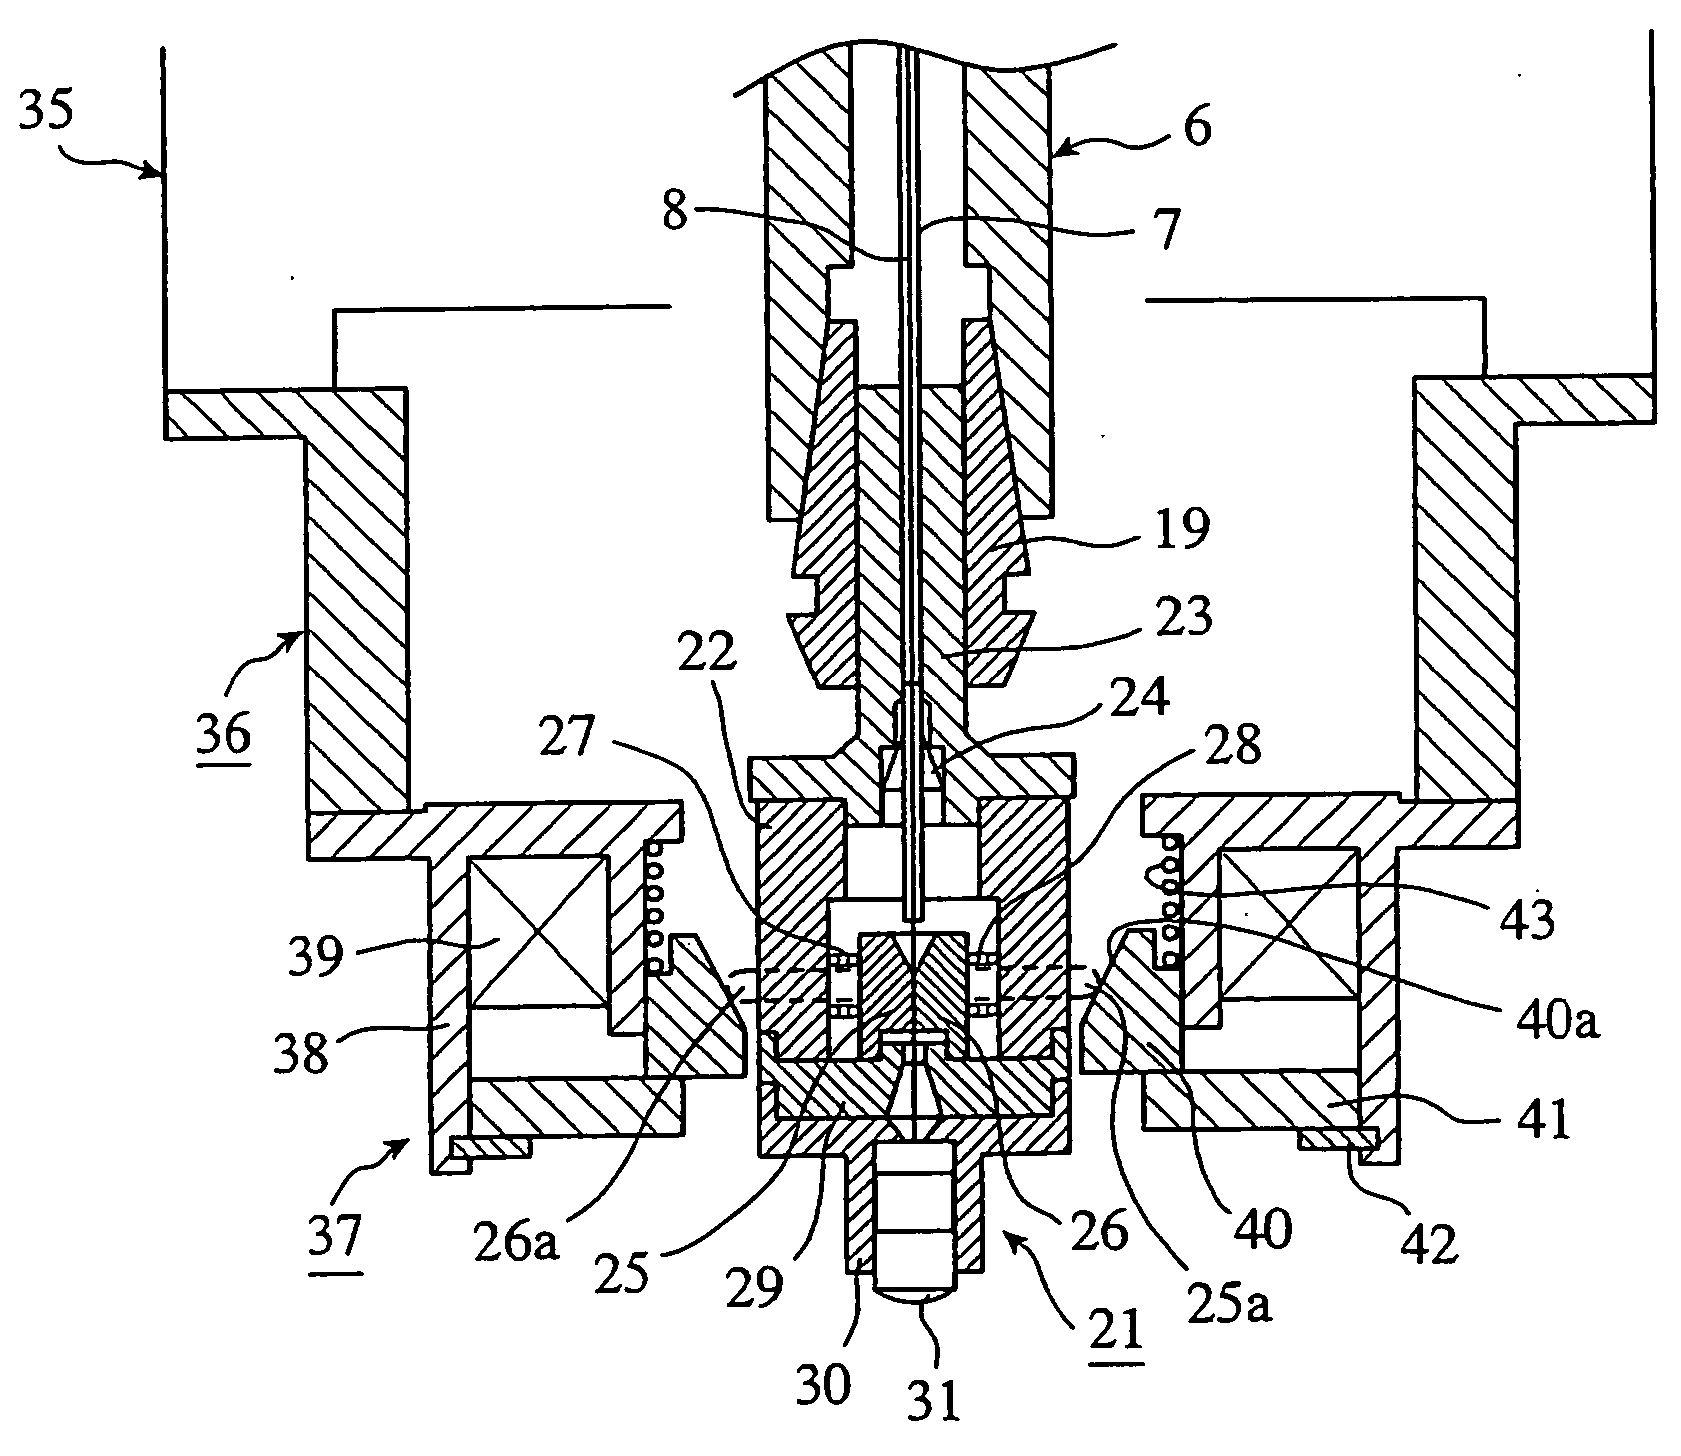 Electric discharge machining apparatus